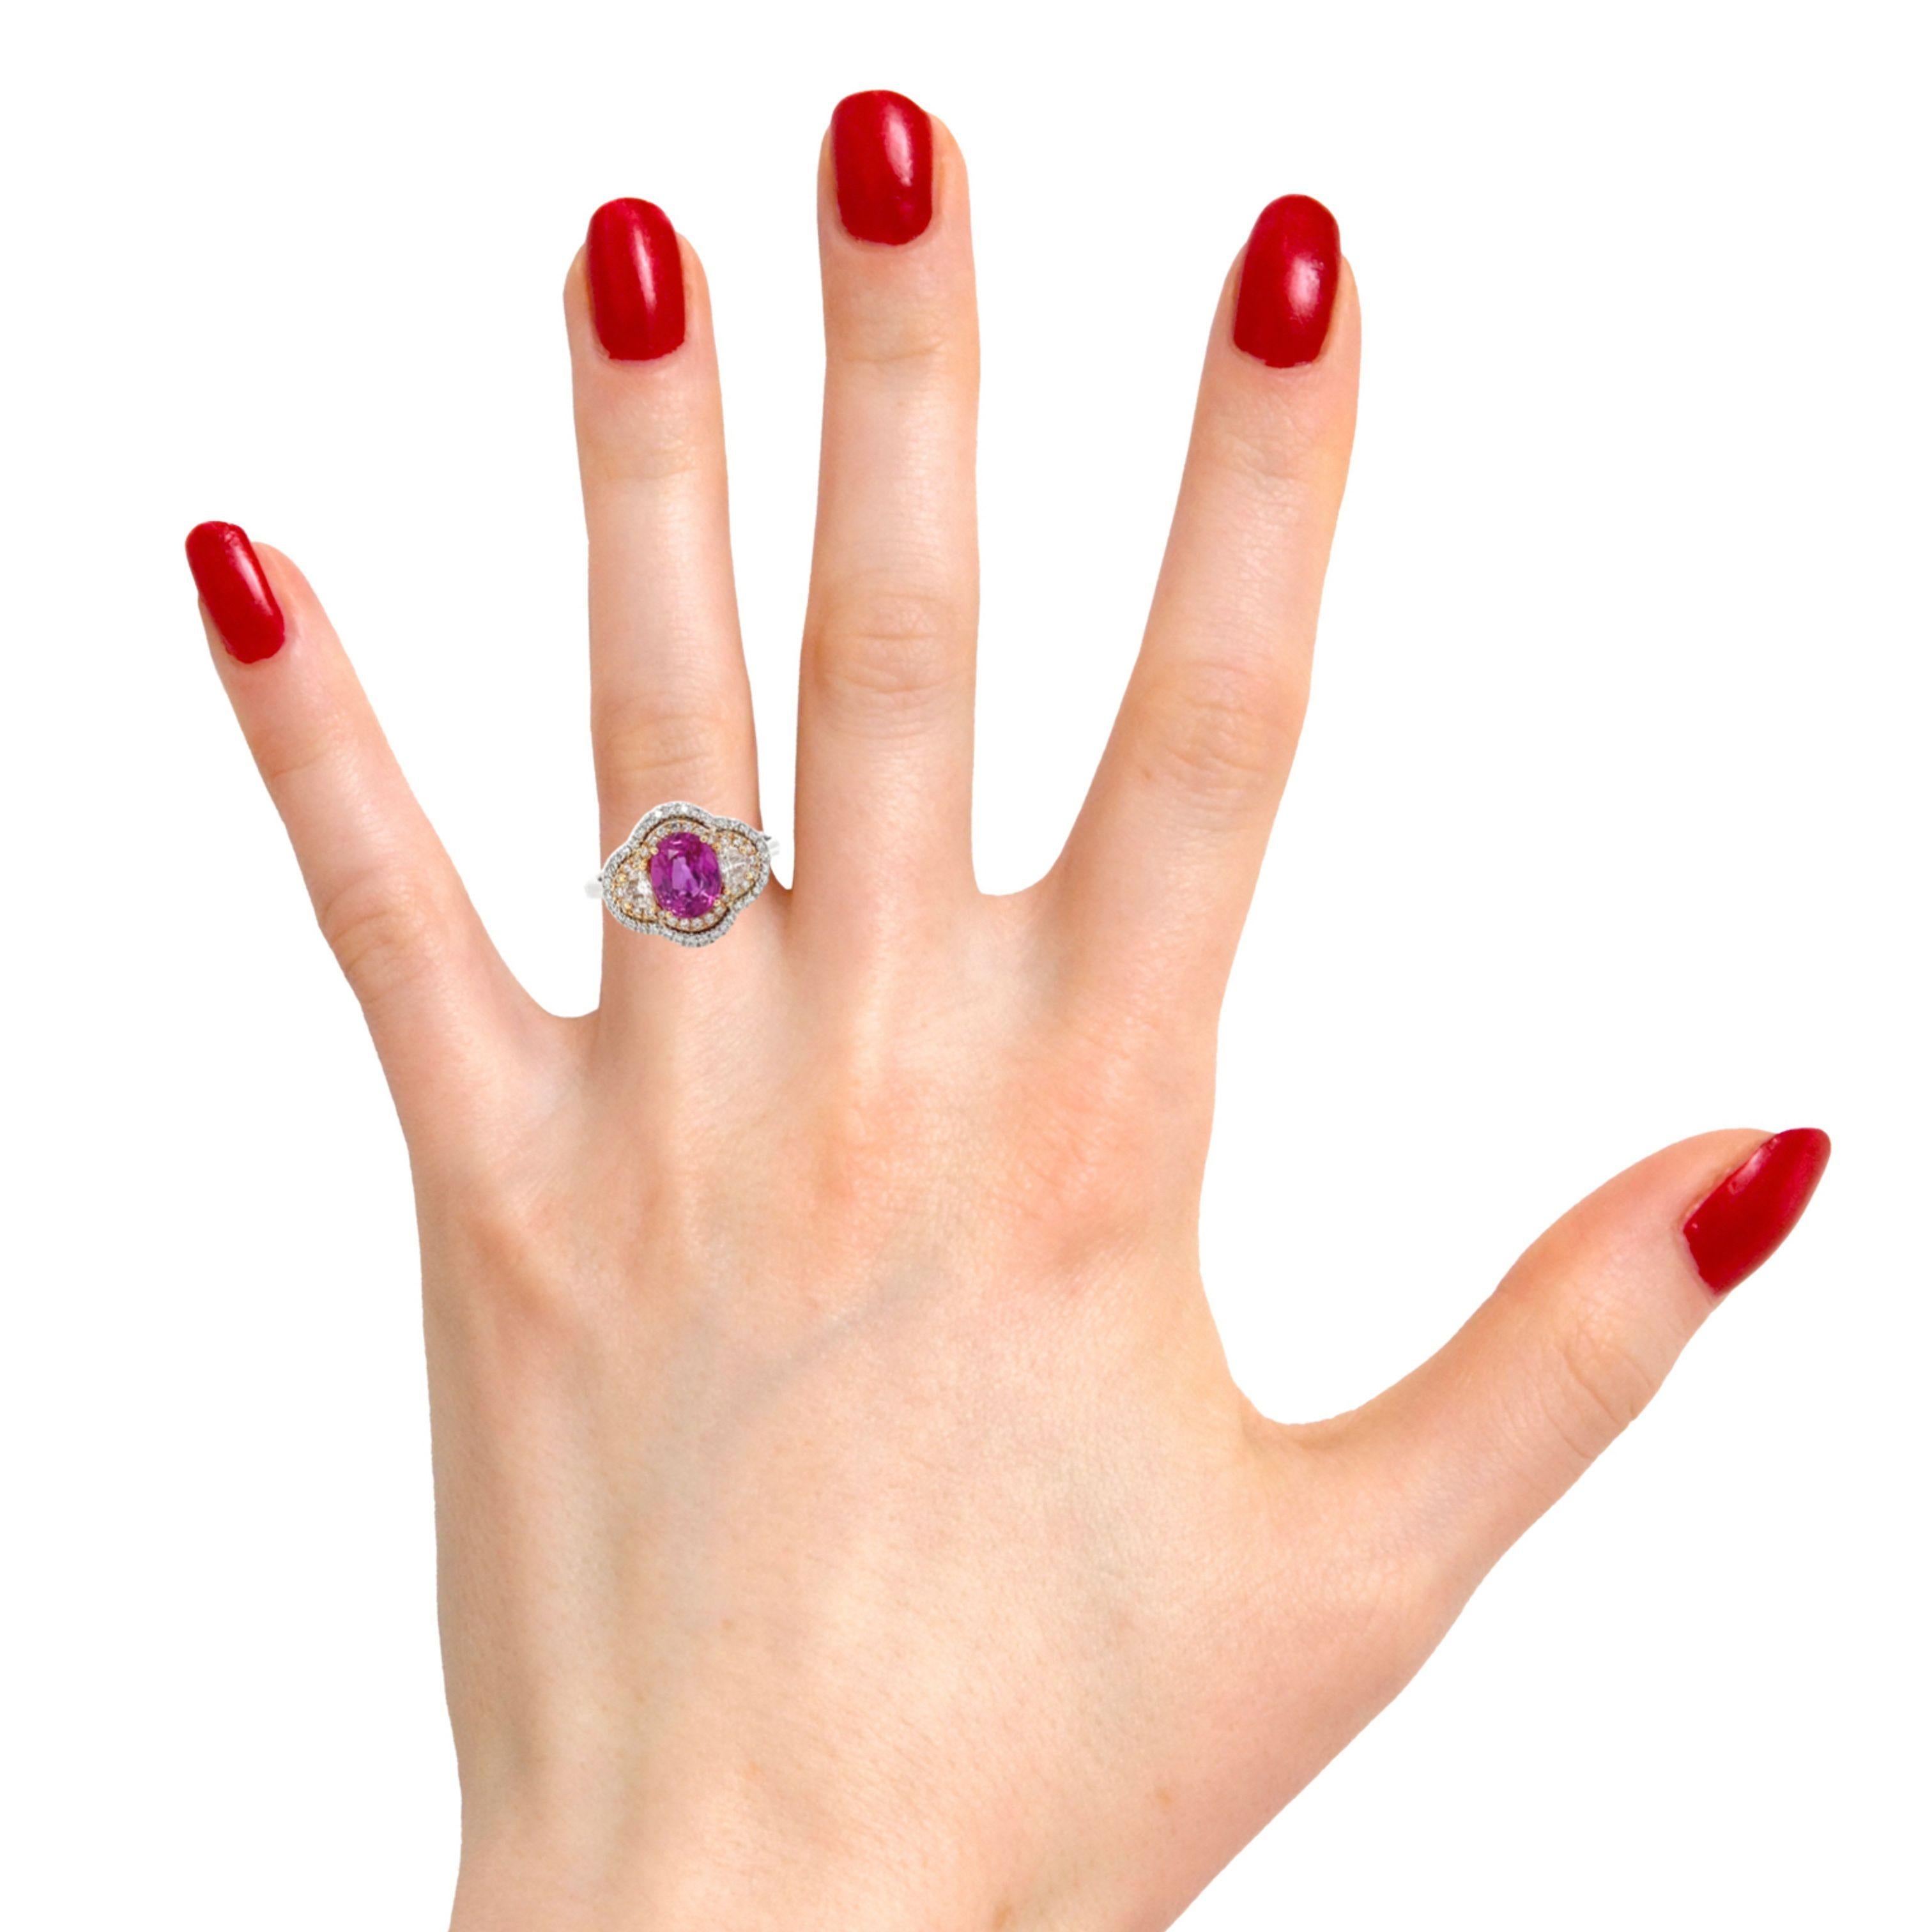 Ring contains 1 center oval brilliant pink sapphire 2.01ct, two matching half moon diamonds 0.25tcw and round brilliant diamonds within double halo 0.35tcw. Diamonds are G in color and VS1 in clarity, excellent cut. All stones are mounted in 18k